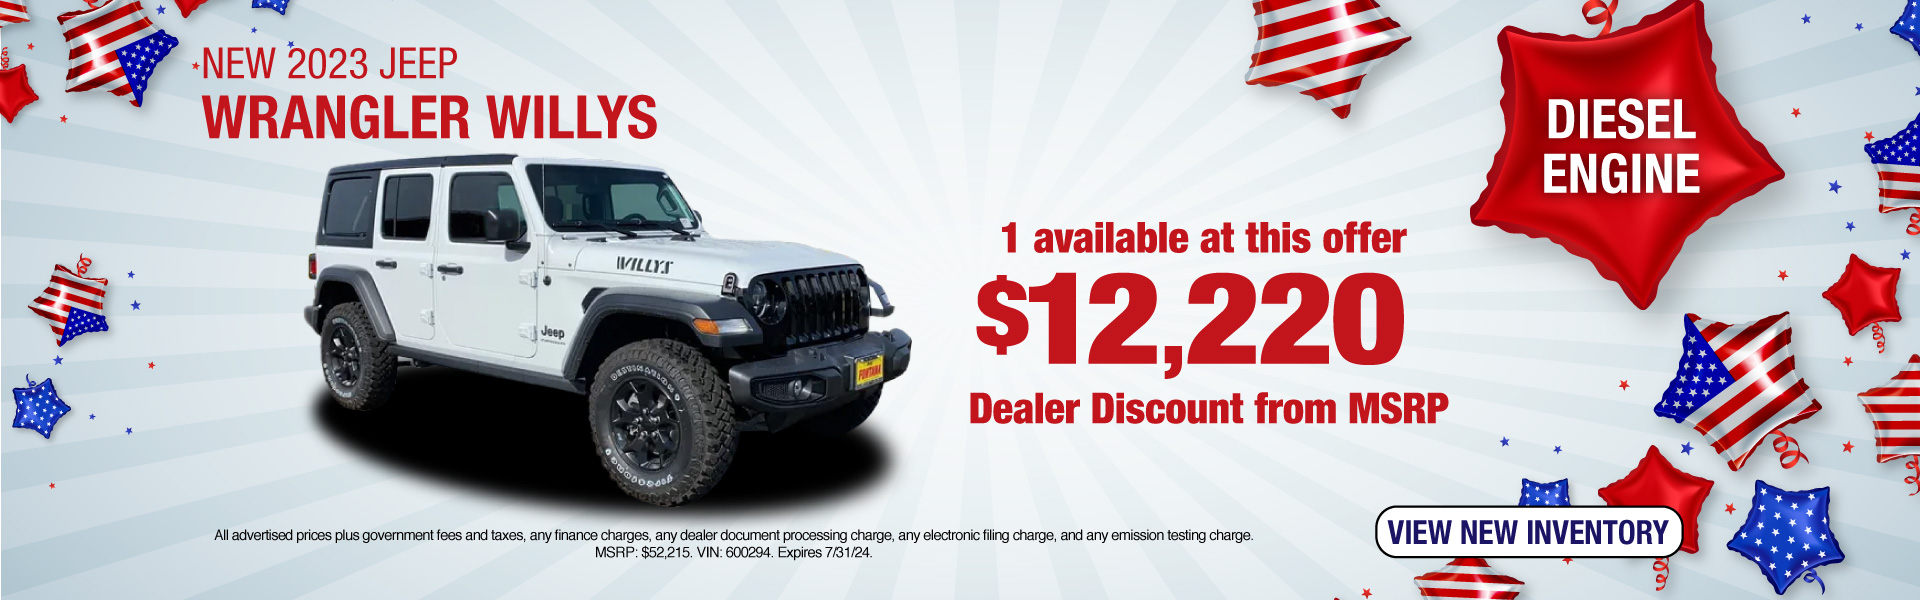 Get a New 2023 Jeep Wrangler Willys with a $12,220 Dealer Discount from MSRP! Expires 7/31/24.